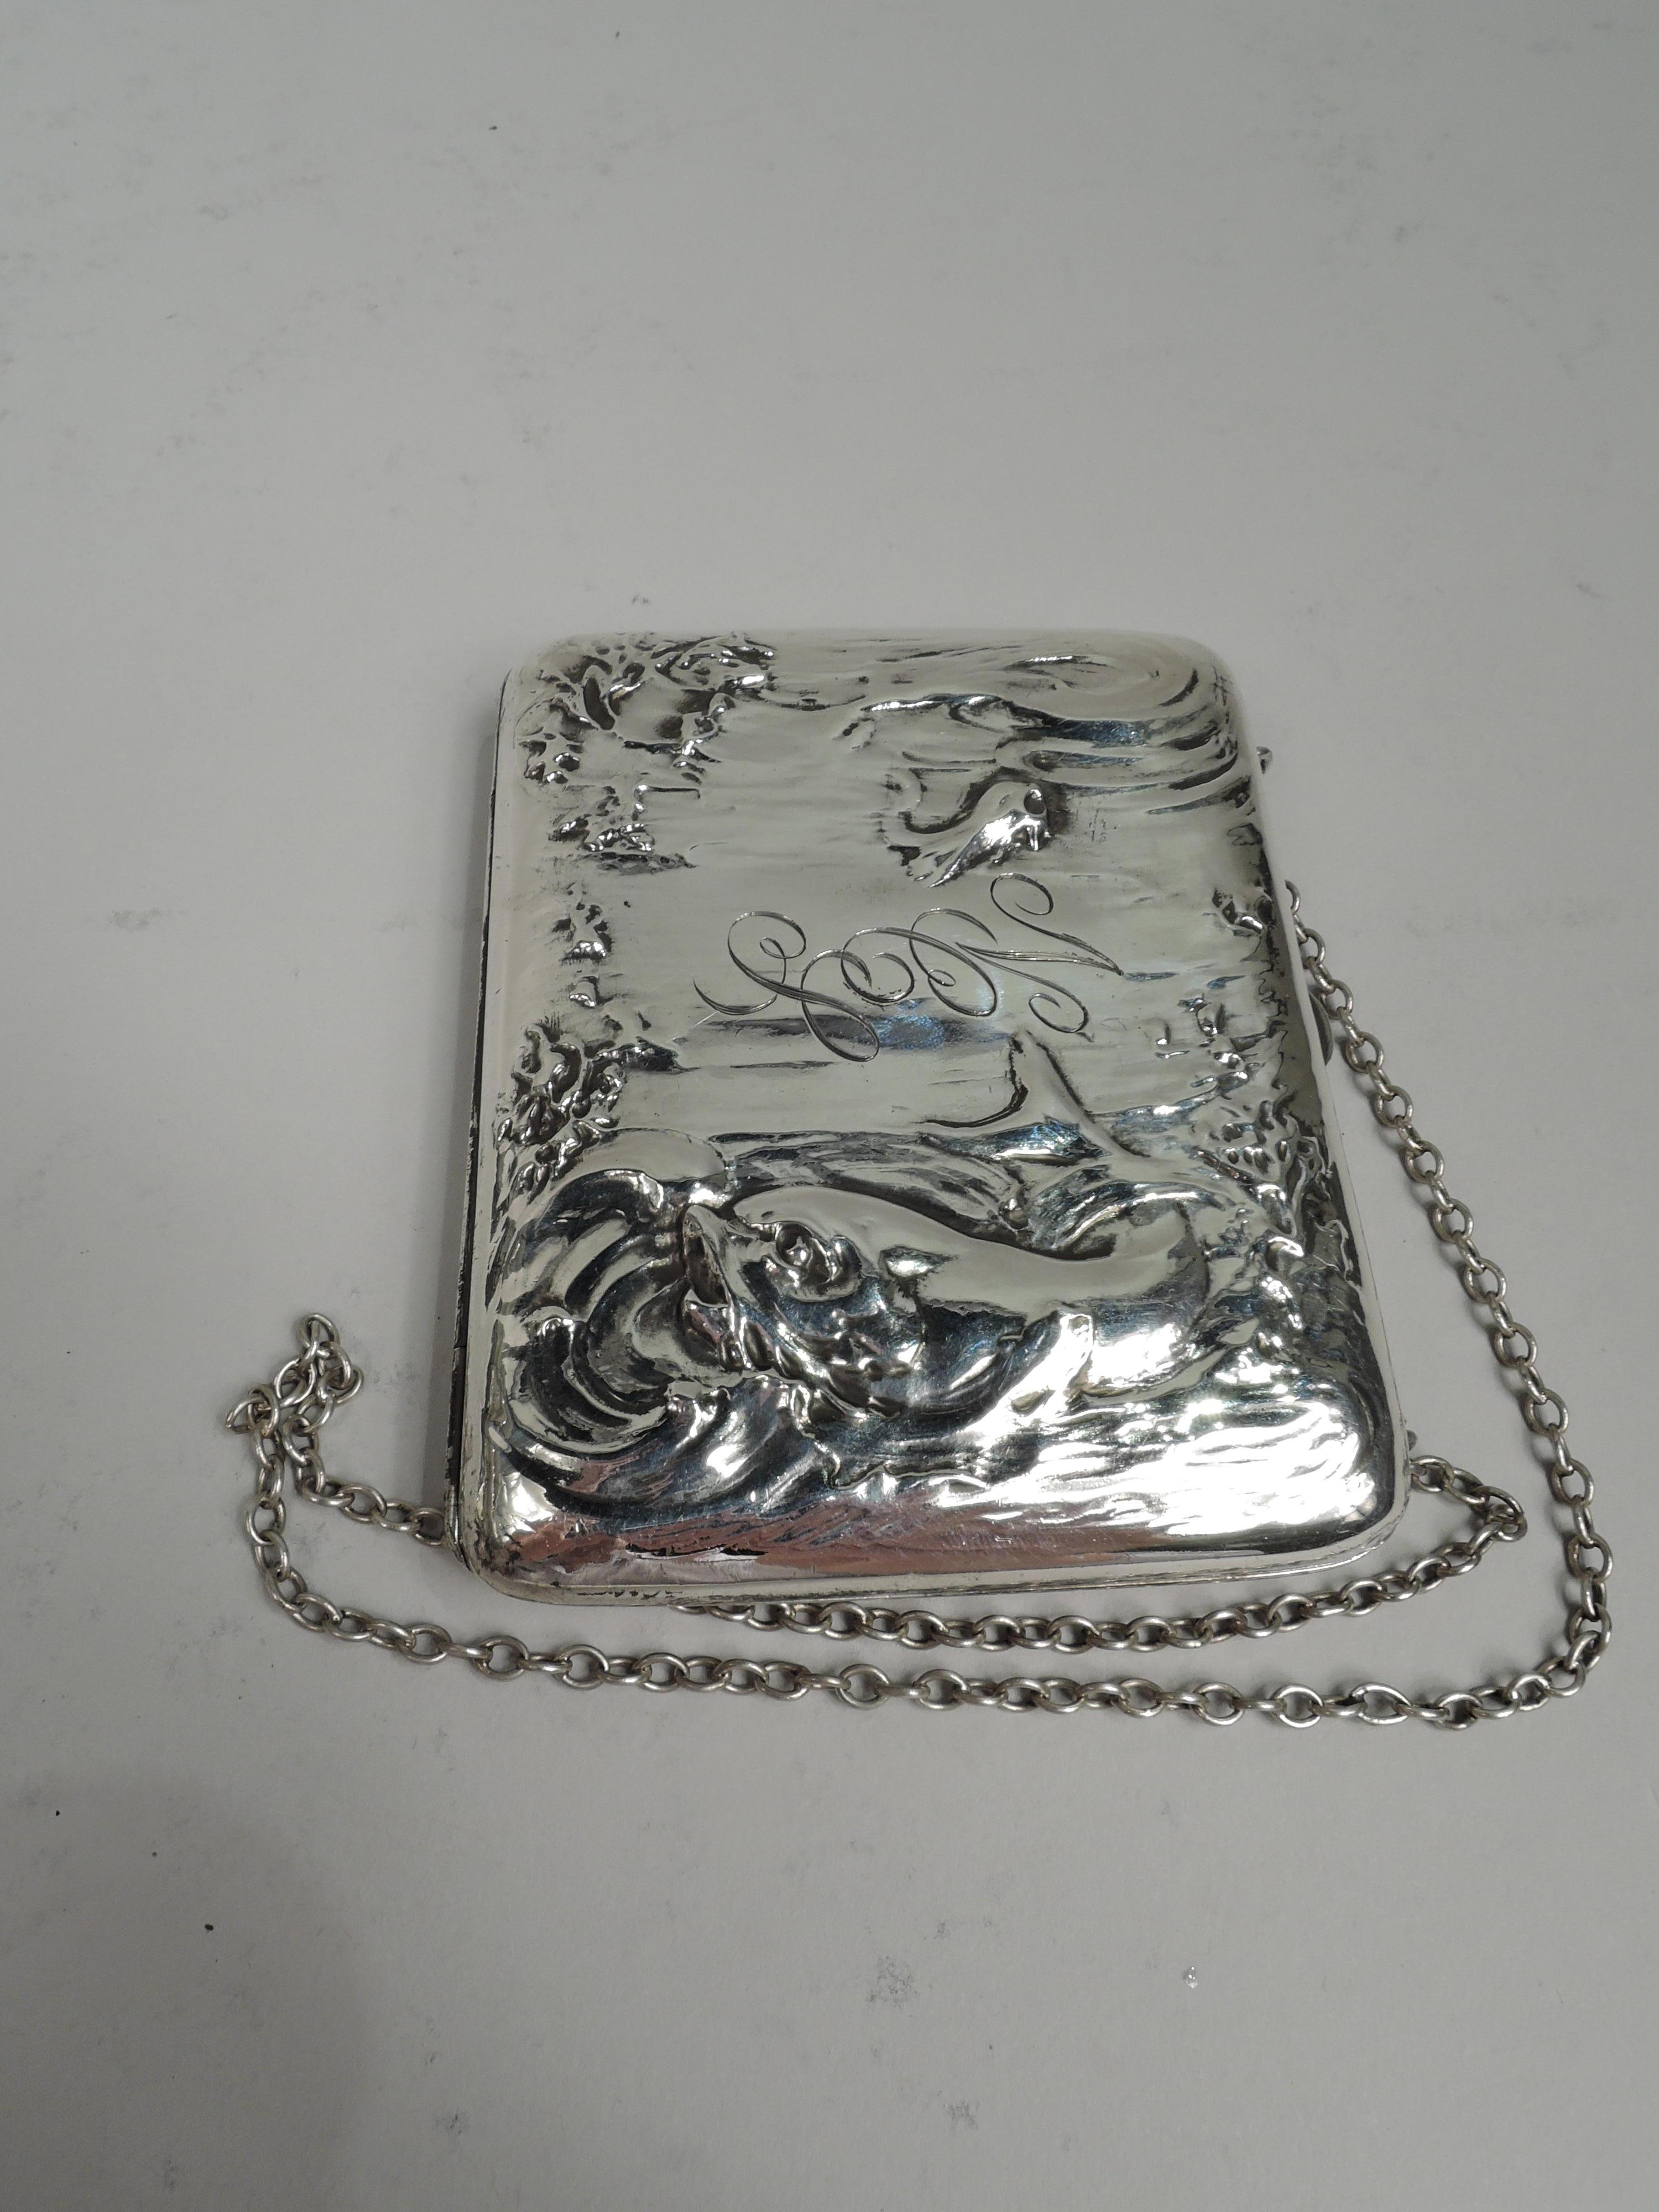 Turn-of-the-century Art Nouveau sterling silver cigarette case. Made by Blackinton in North Attleboro, Mass. Rectangular and hinged. On front and back is same marine scene with whiplash currents and seagrass. At bottom is a big tail-lashing fish,